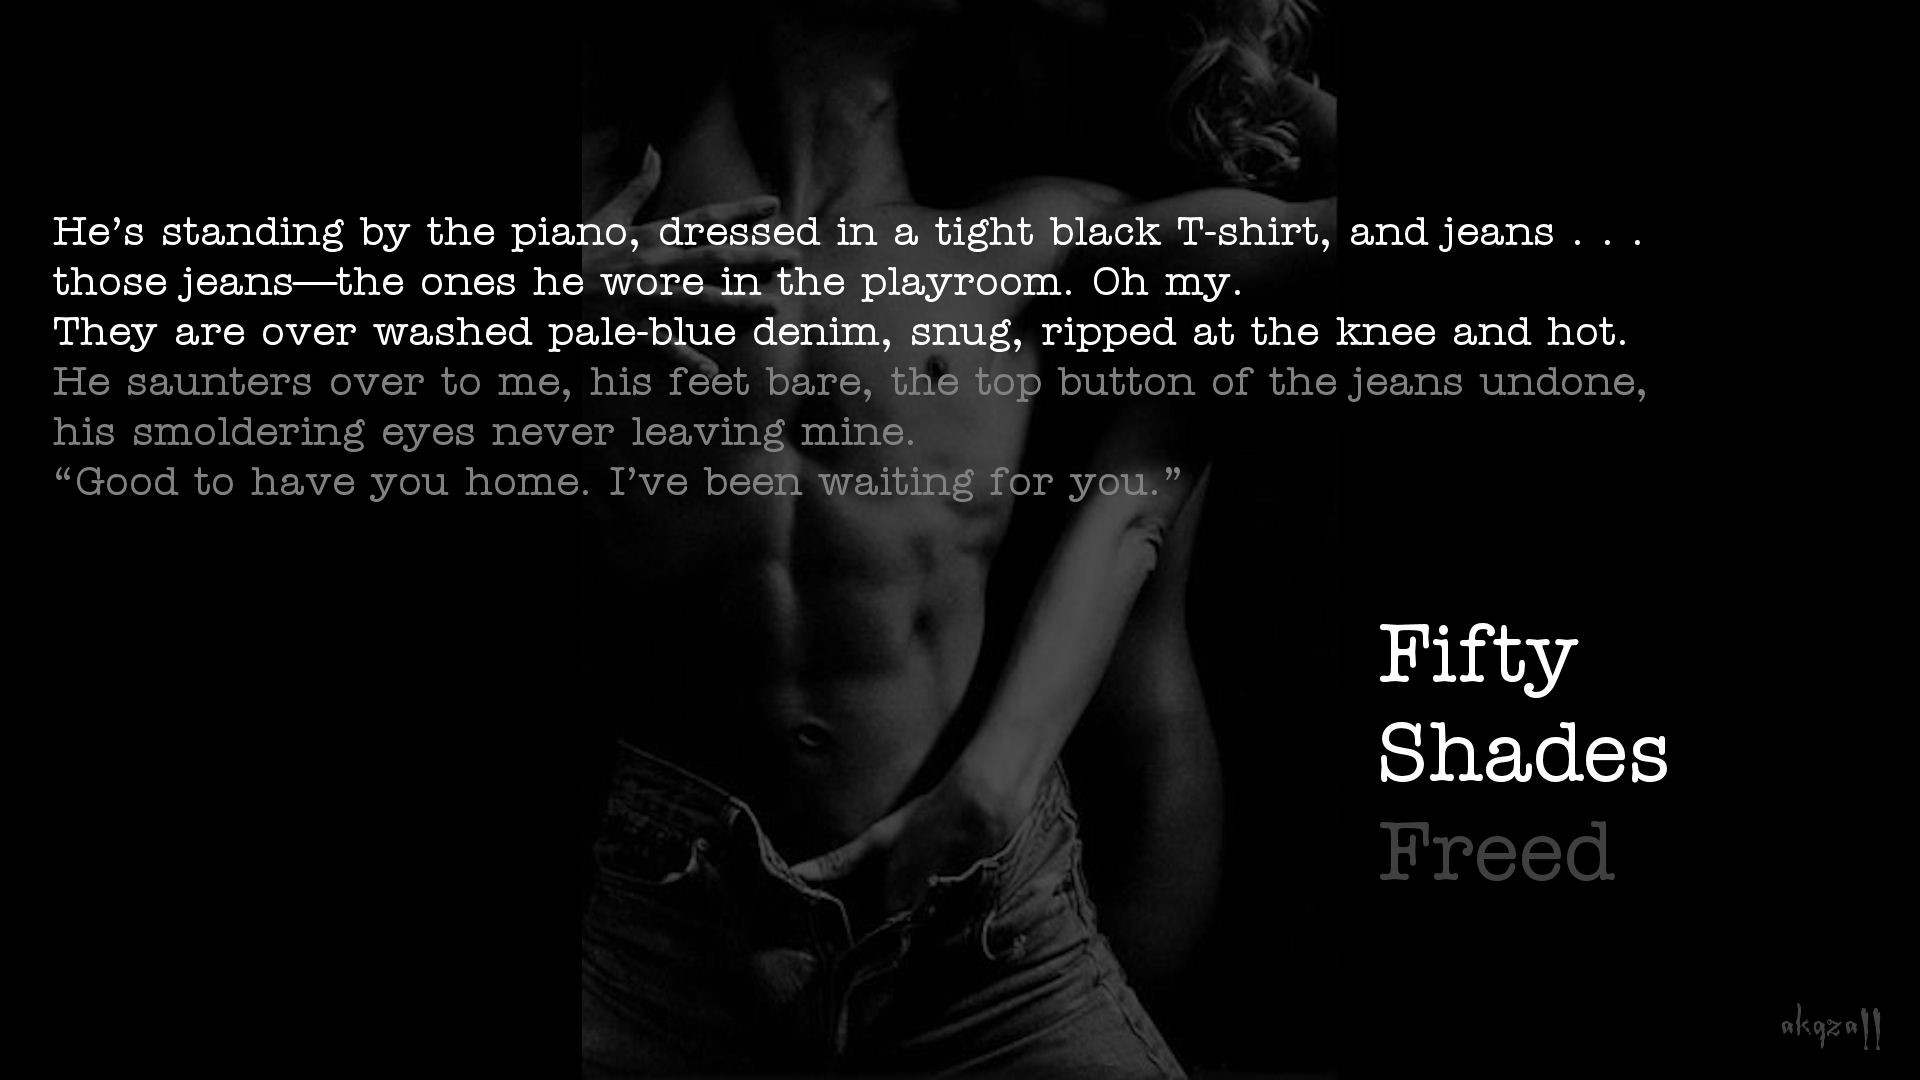 #FiftyShades 0ShadesSource www.facebook.com / FiftyShadesSource Greyisms Pinterest 50 shades, Grey quotes